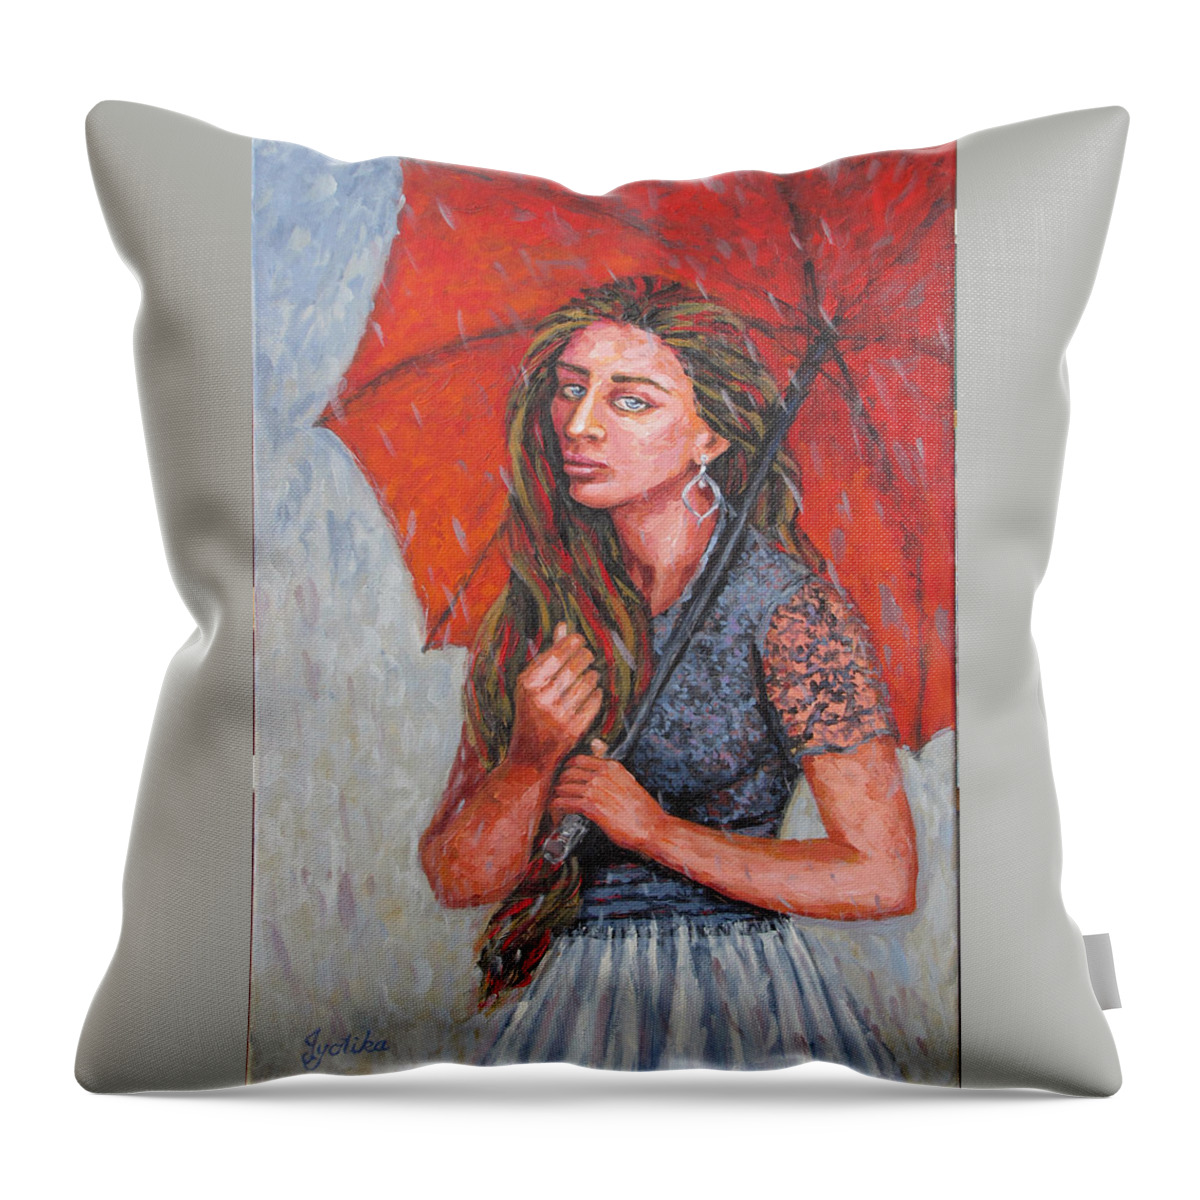 Umbrella Throw Pillow featuring the painting The Red Umbrella by Jyotika Shroff